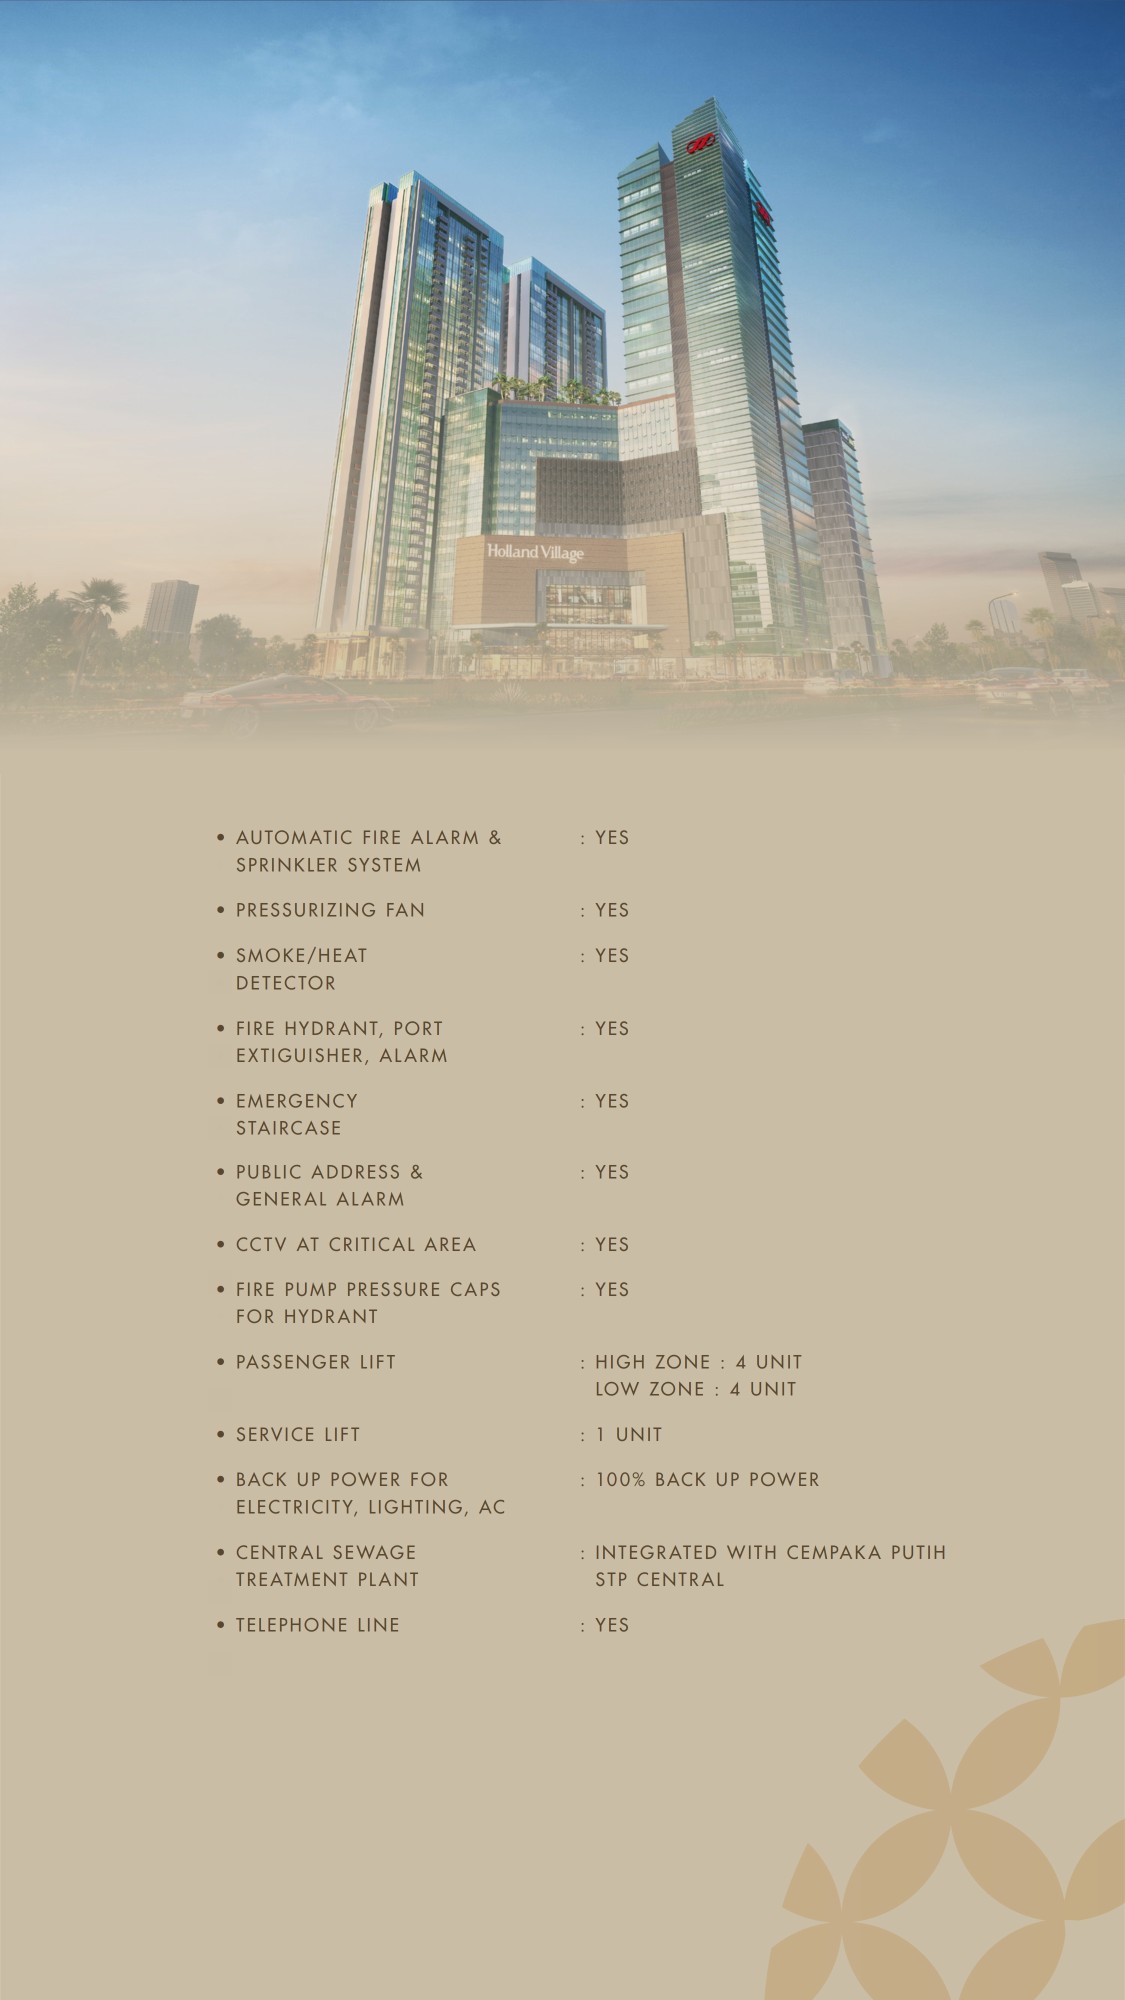 Specification Holand Village Office Tower (1)